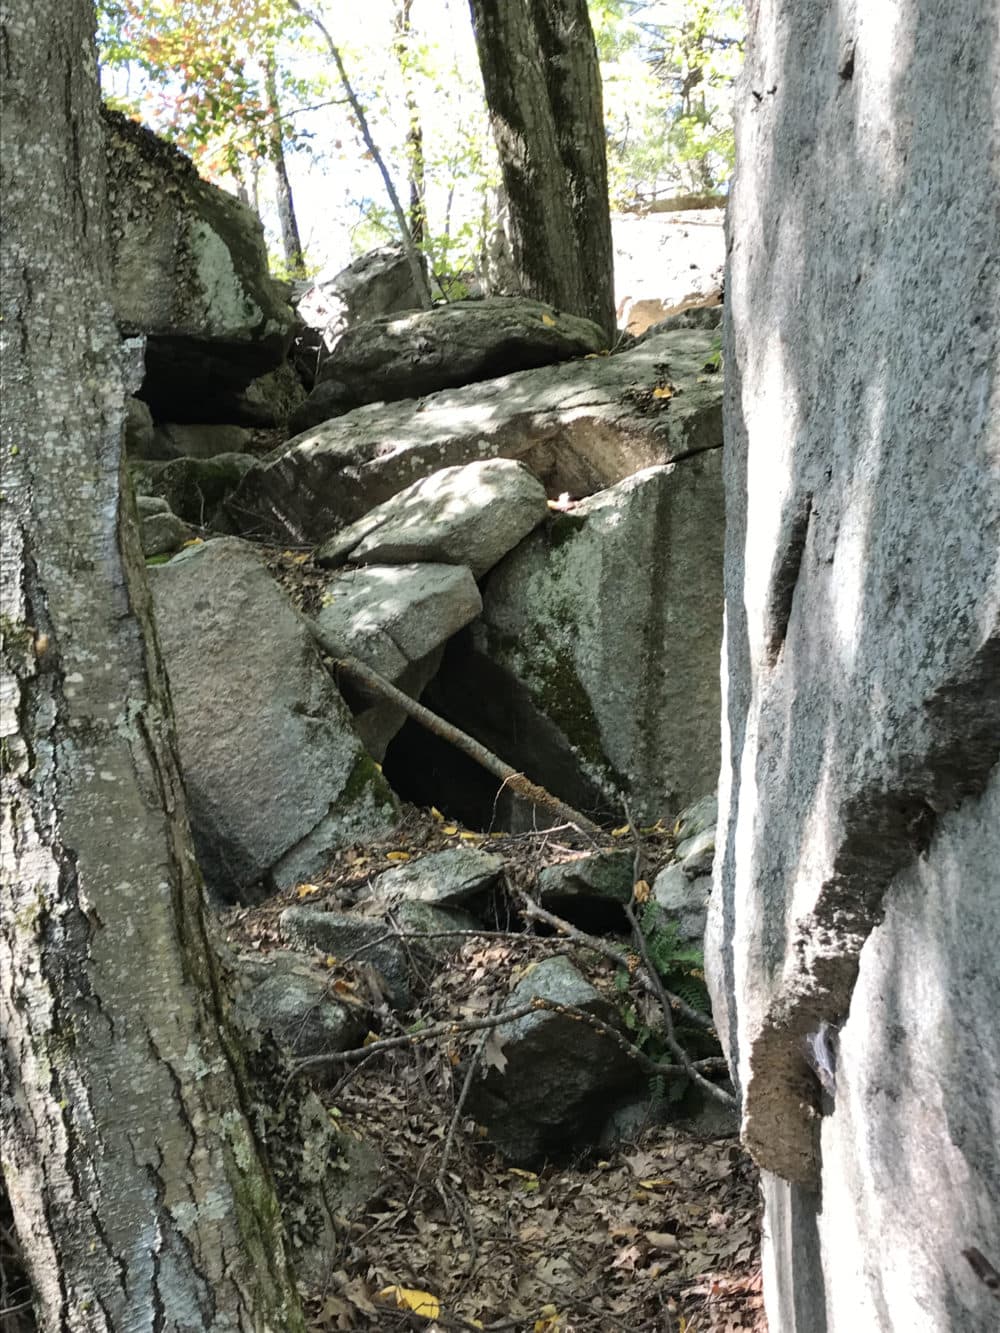 Local historians say in 1693 some people suspected of witchcraft traveled to the woods in the Framingham/Ashland area to hide in the &quot;witch caves.&quot; (Deborah Becker/WBUR)